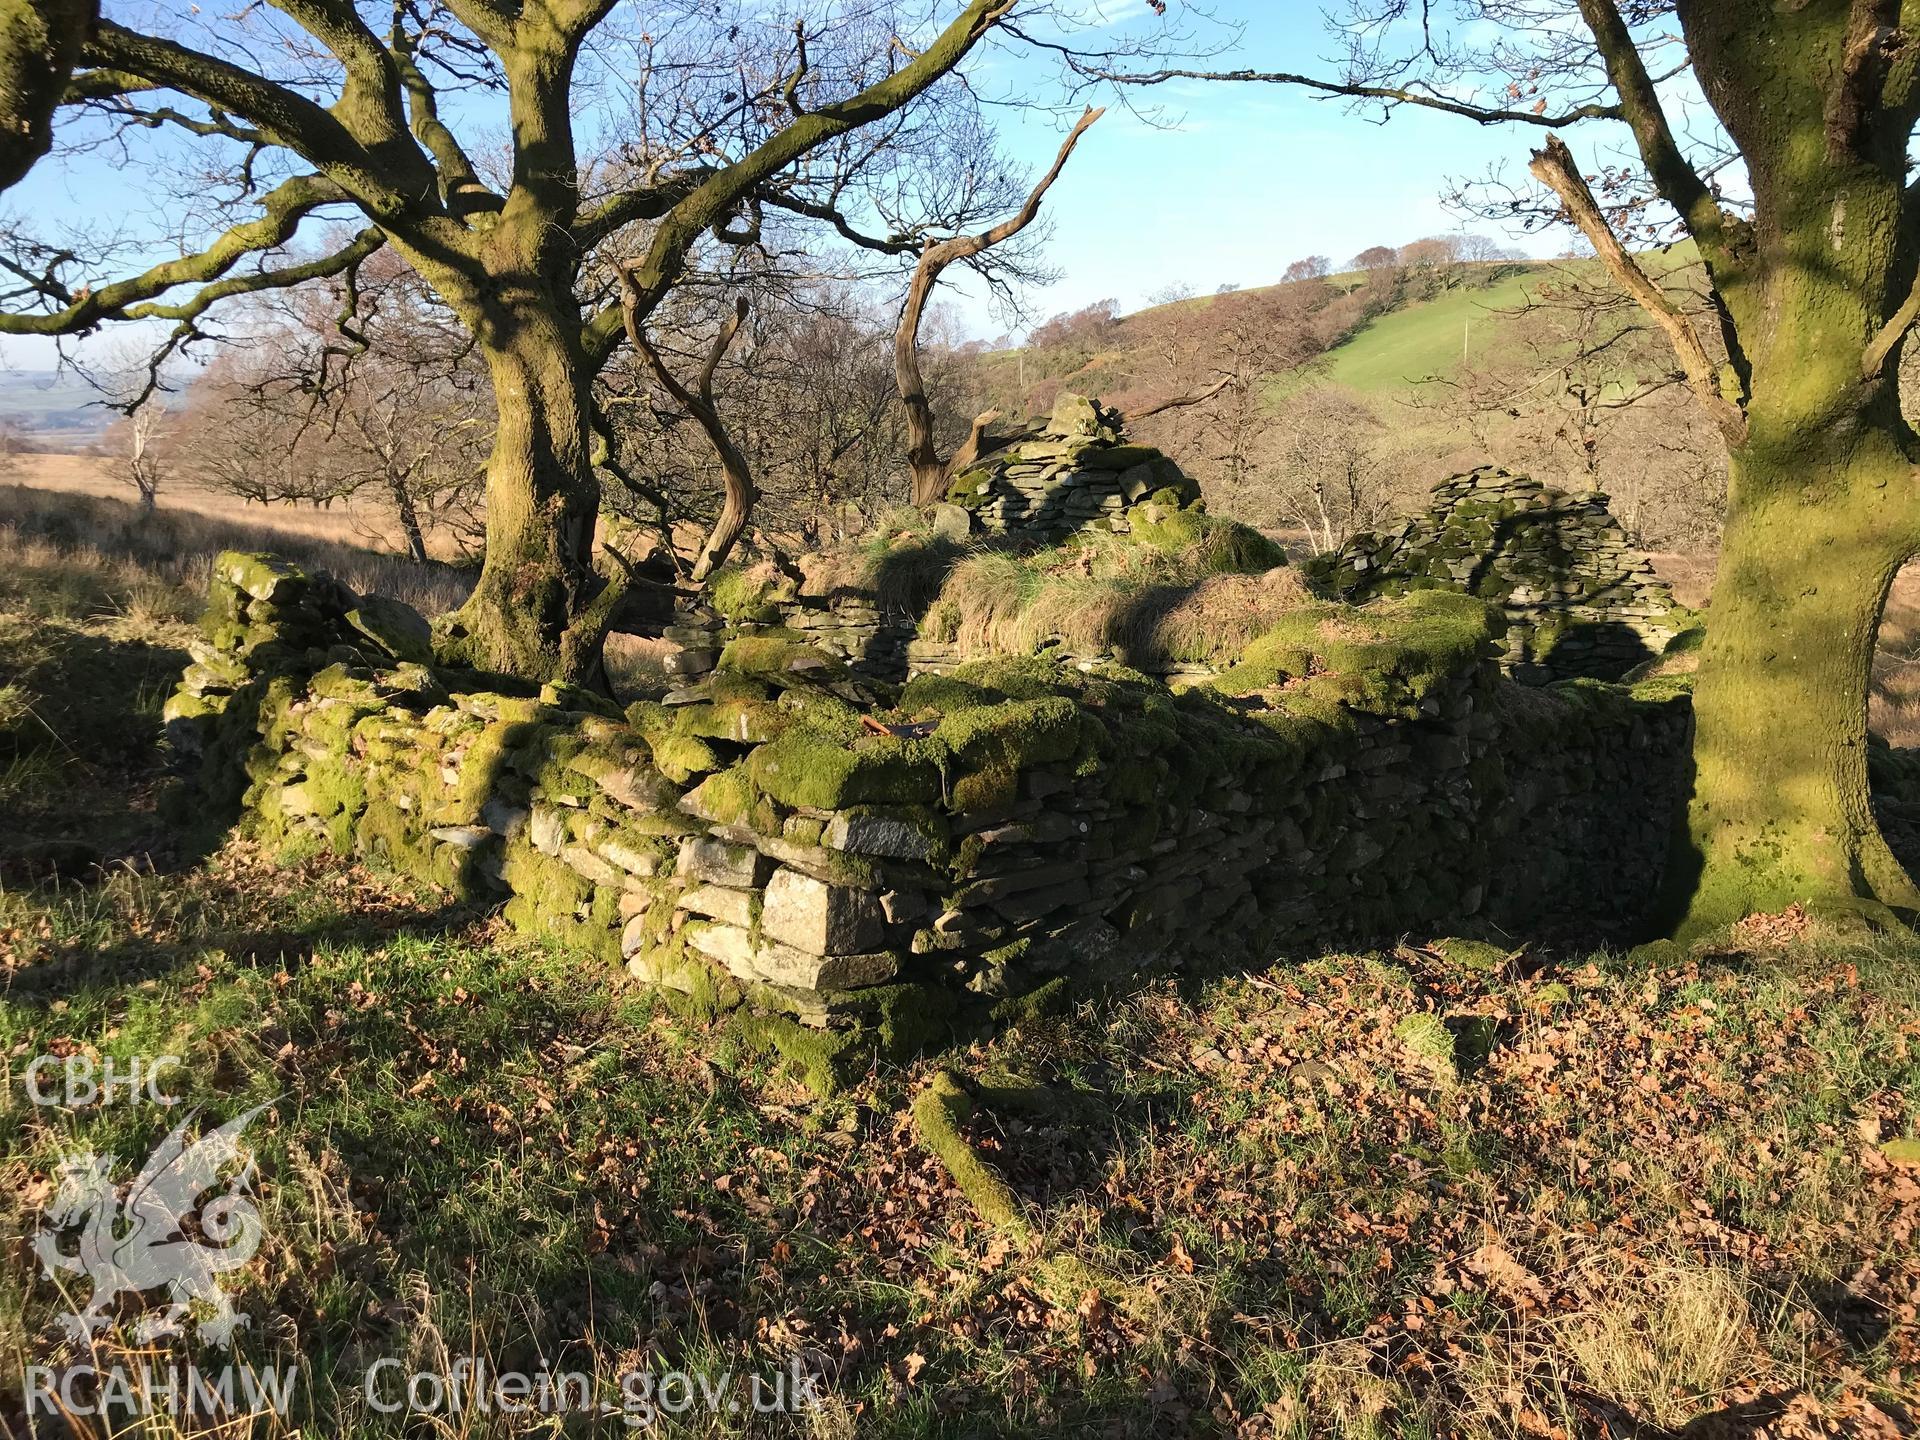 Exterior view of a small stone cottage or outbuilding south of the ruined Castell, which is south west of Bryneithinog farm, Ystrad Fflur. Colour photograph taken by Paul R. Davis on 18th November 2018.